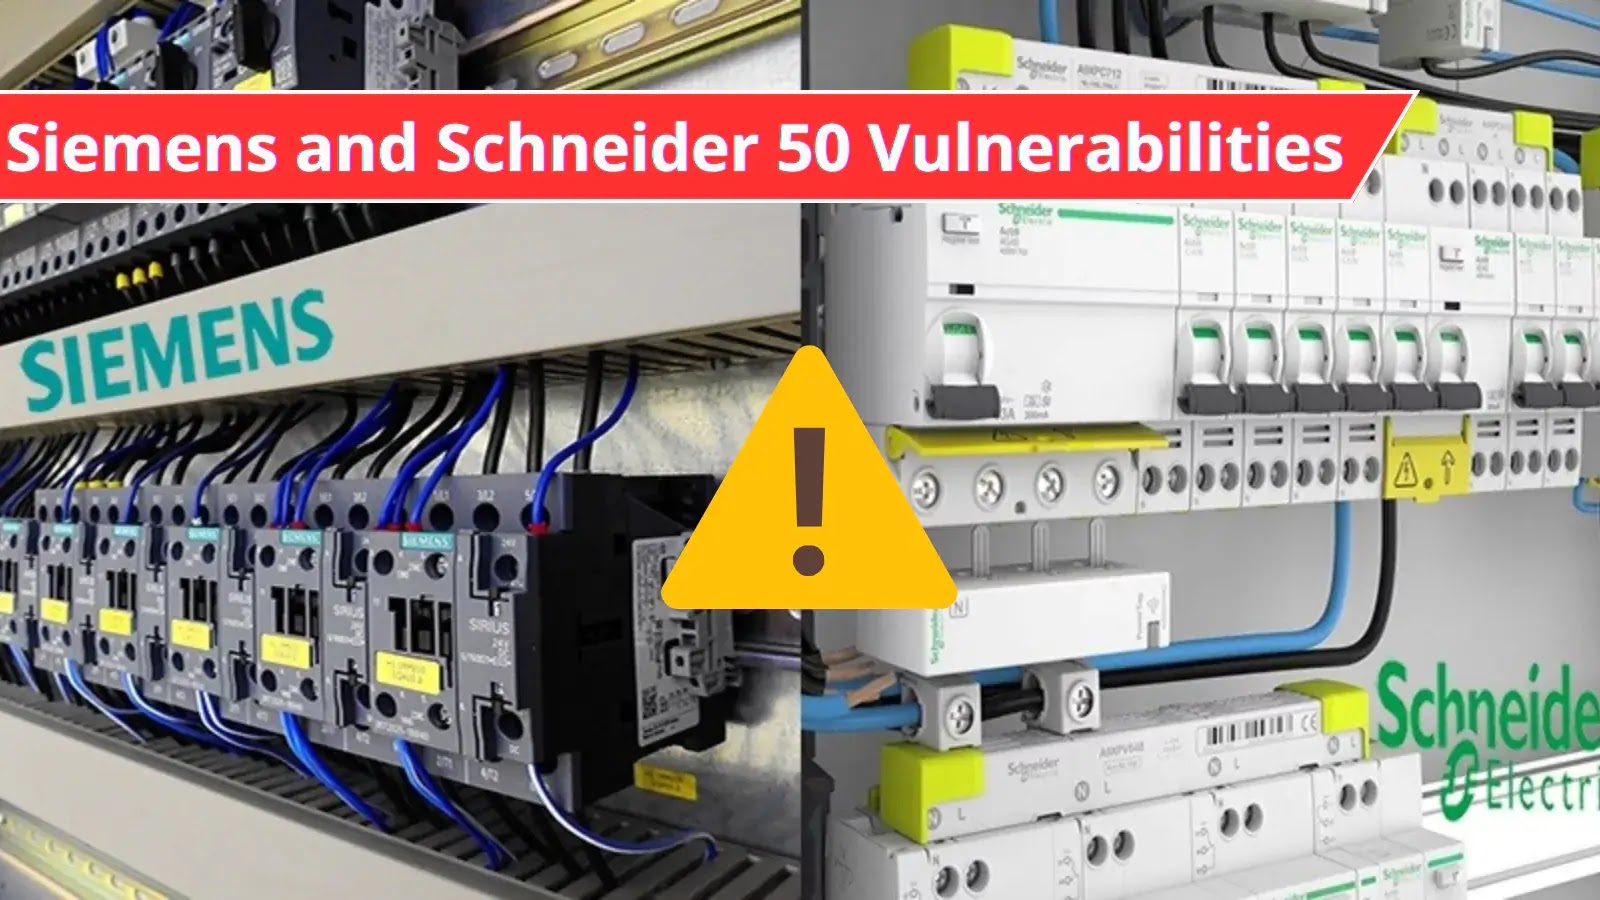 ICS/OTICS Patch Tuesday: Siemens and Schneider Electric Releases Patch for 50 vulnerabilities